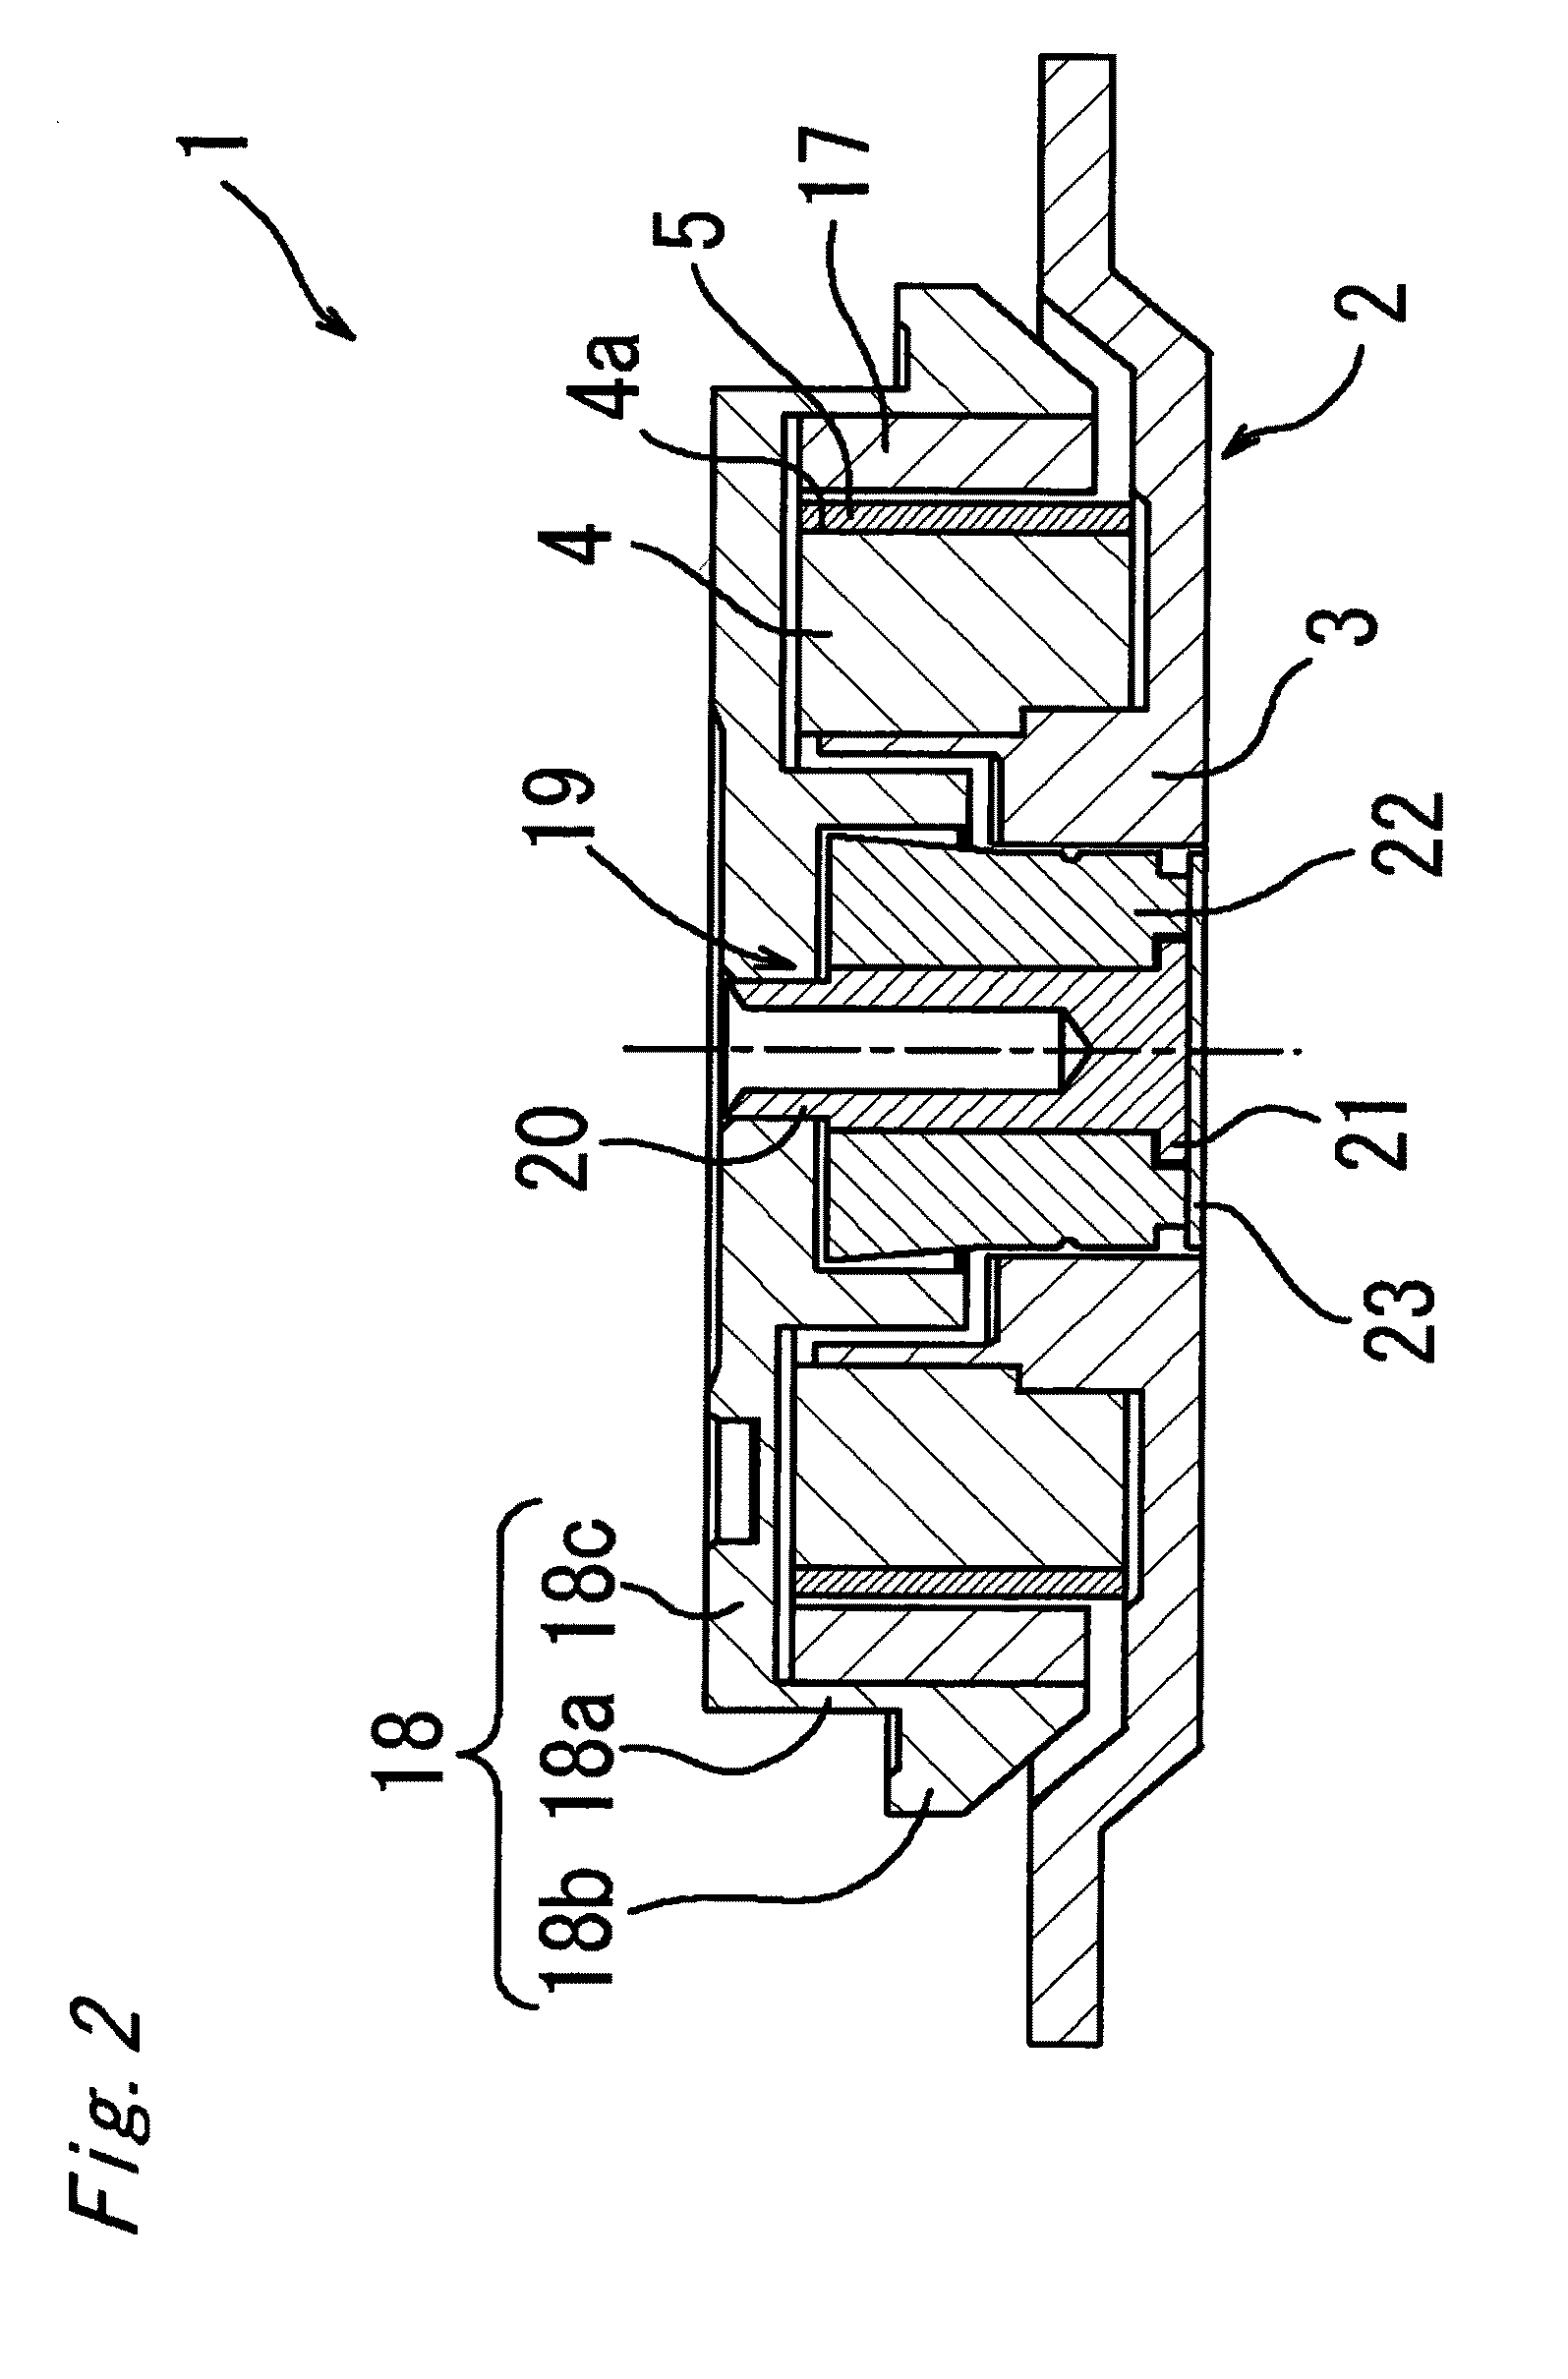 Motor with sheet-like coil